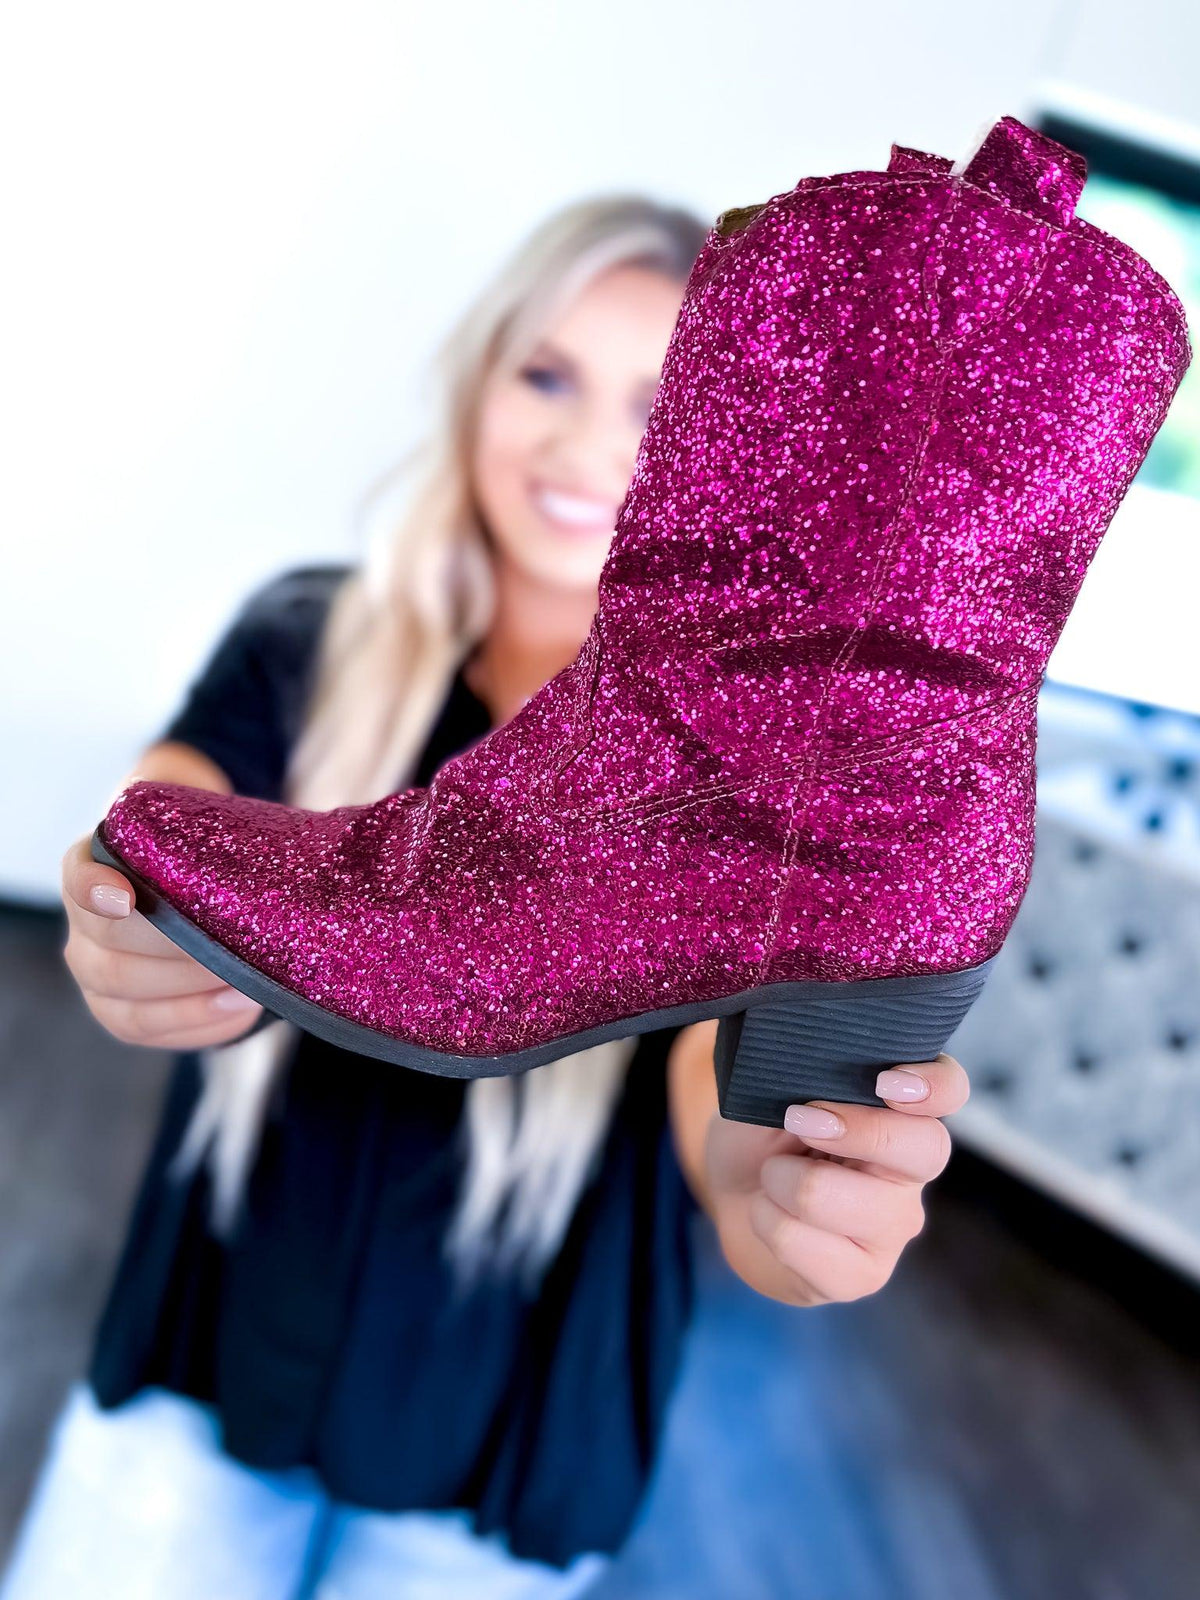 Fuchsia West Party Boots - The ZigZag Stripe